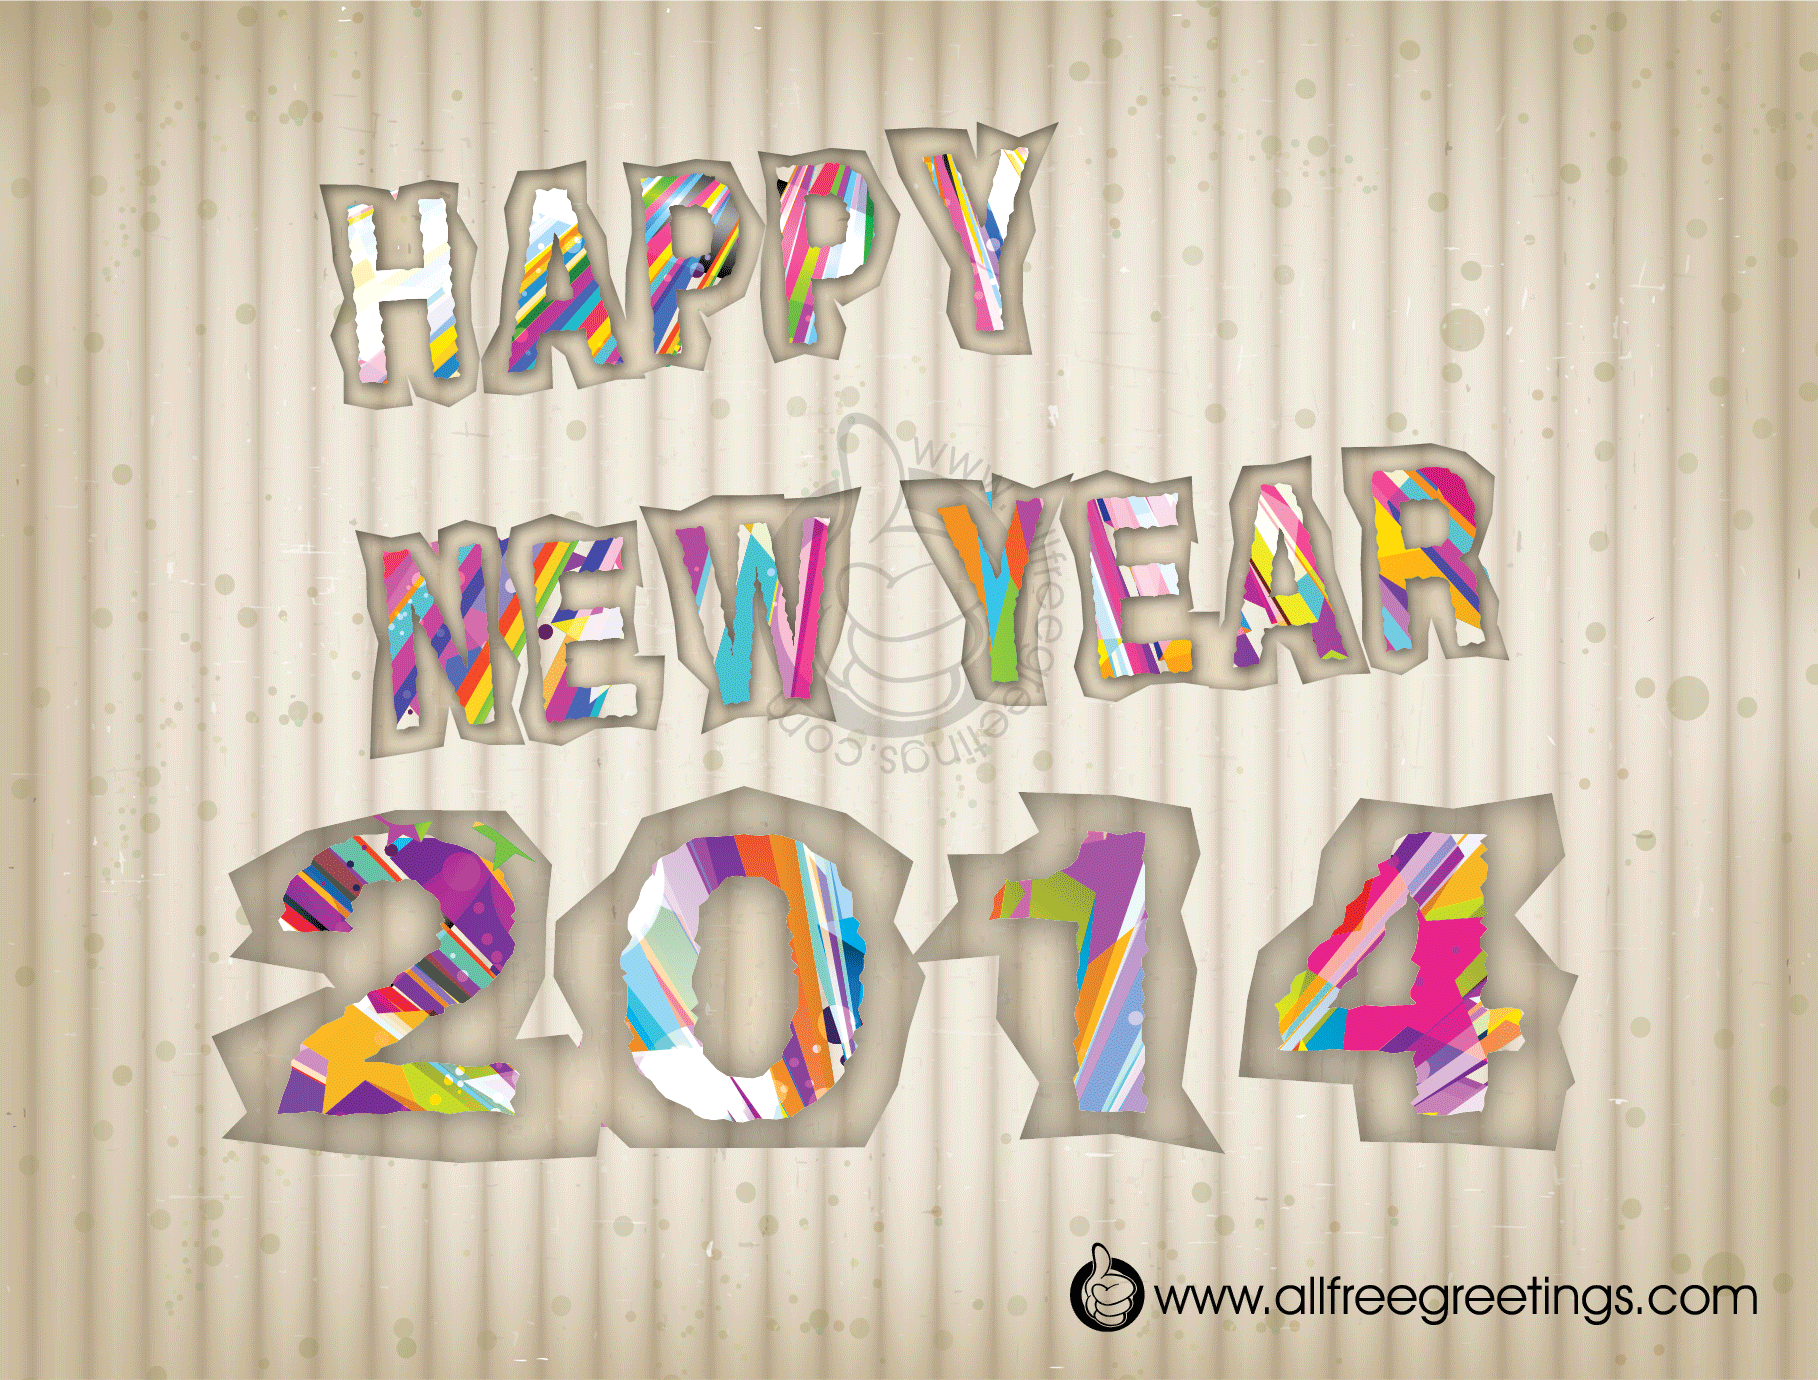 animated new year wallpaper 2014